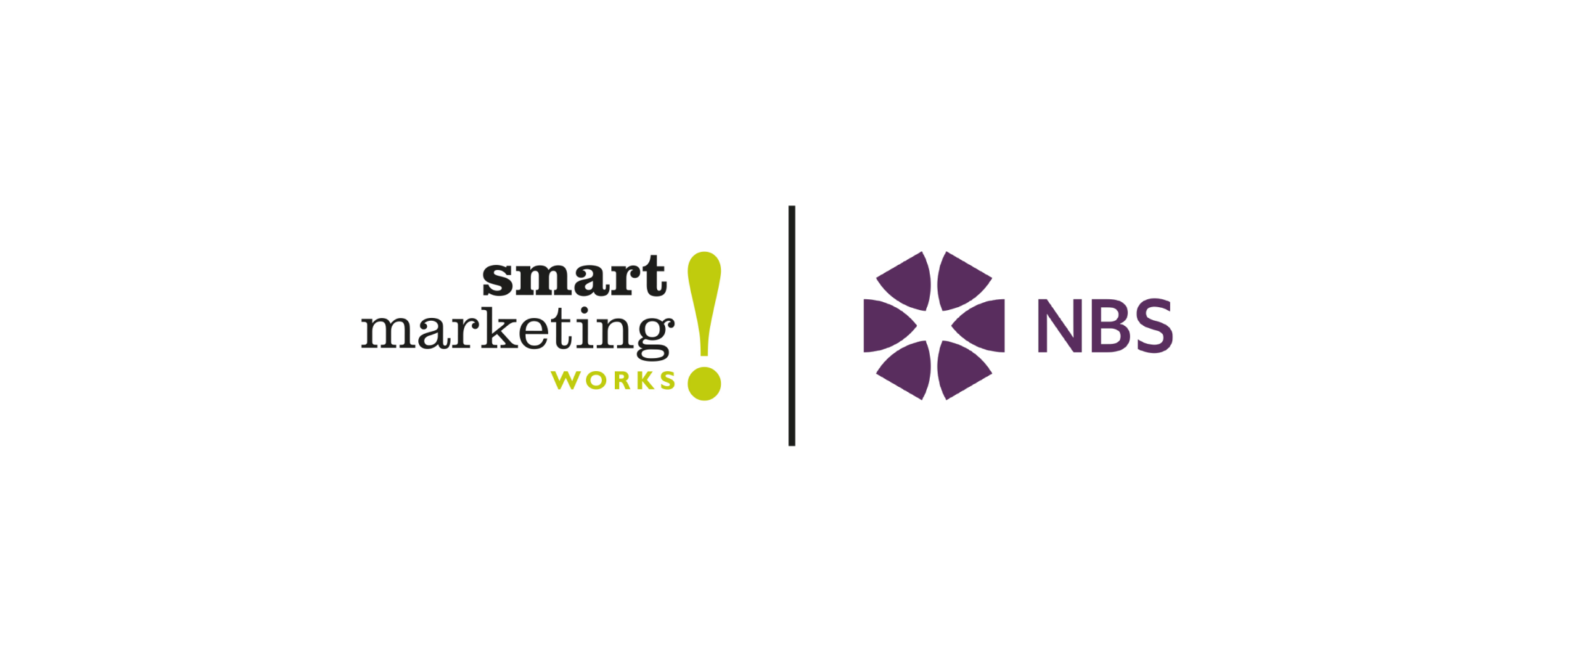 NBS Recognition for Smart Marketing Works